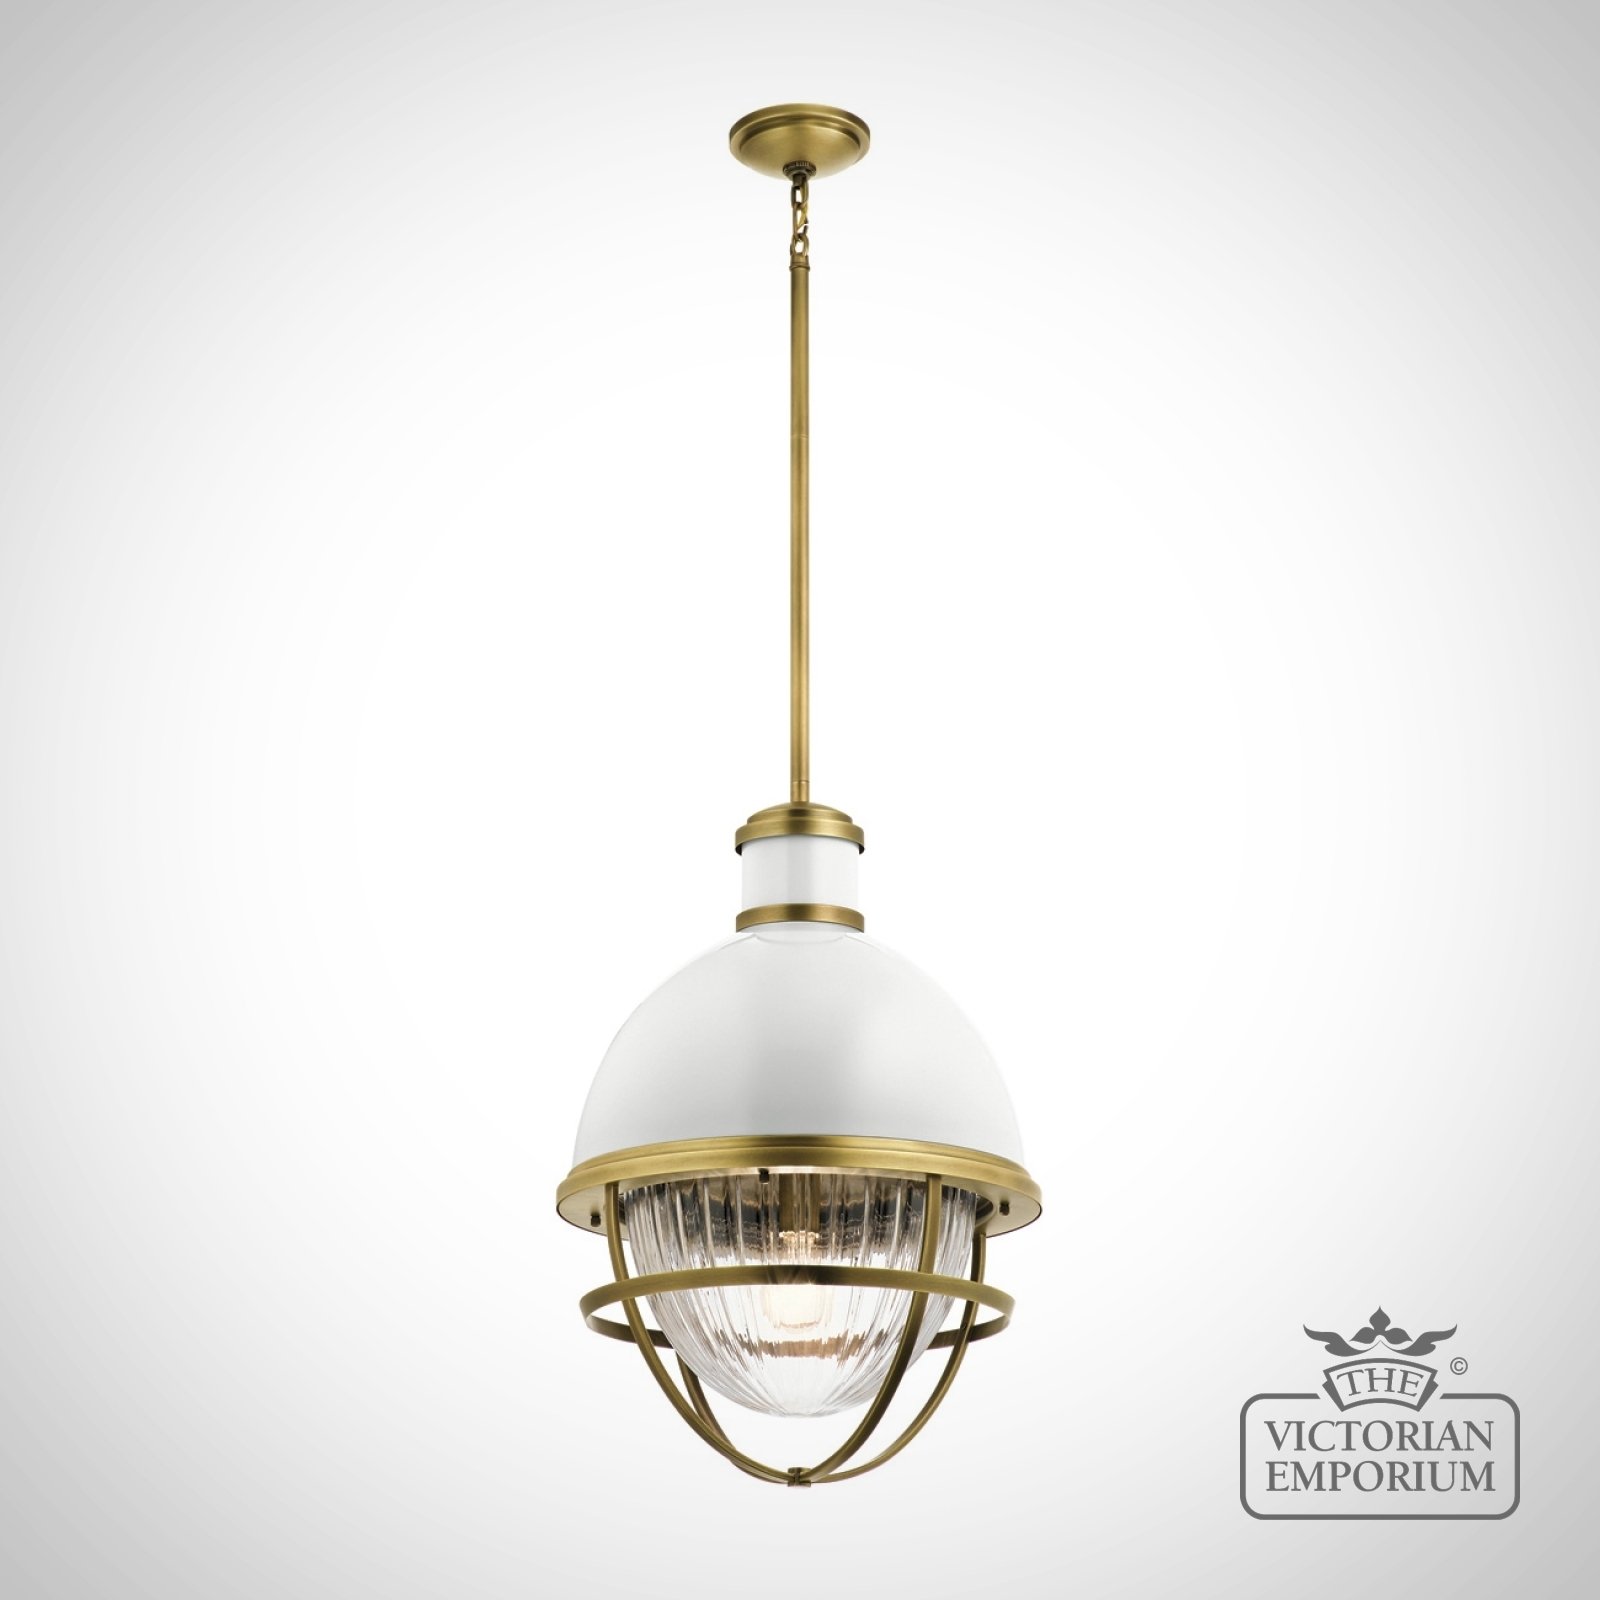 Tollis Ceiling Pendant Light in Natural Brass or Brushed Nickel